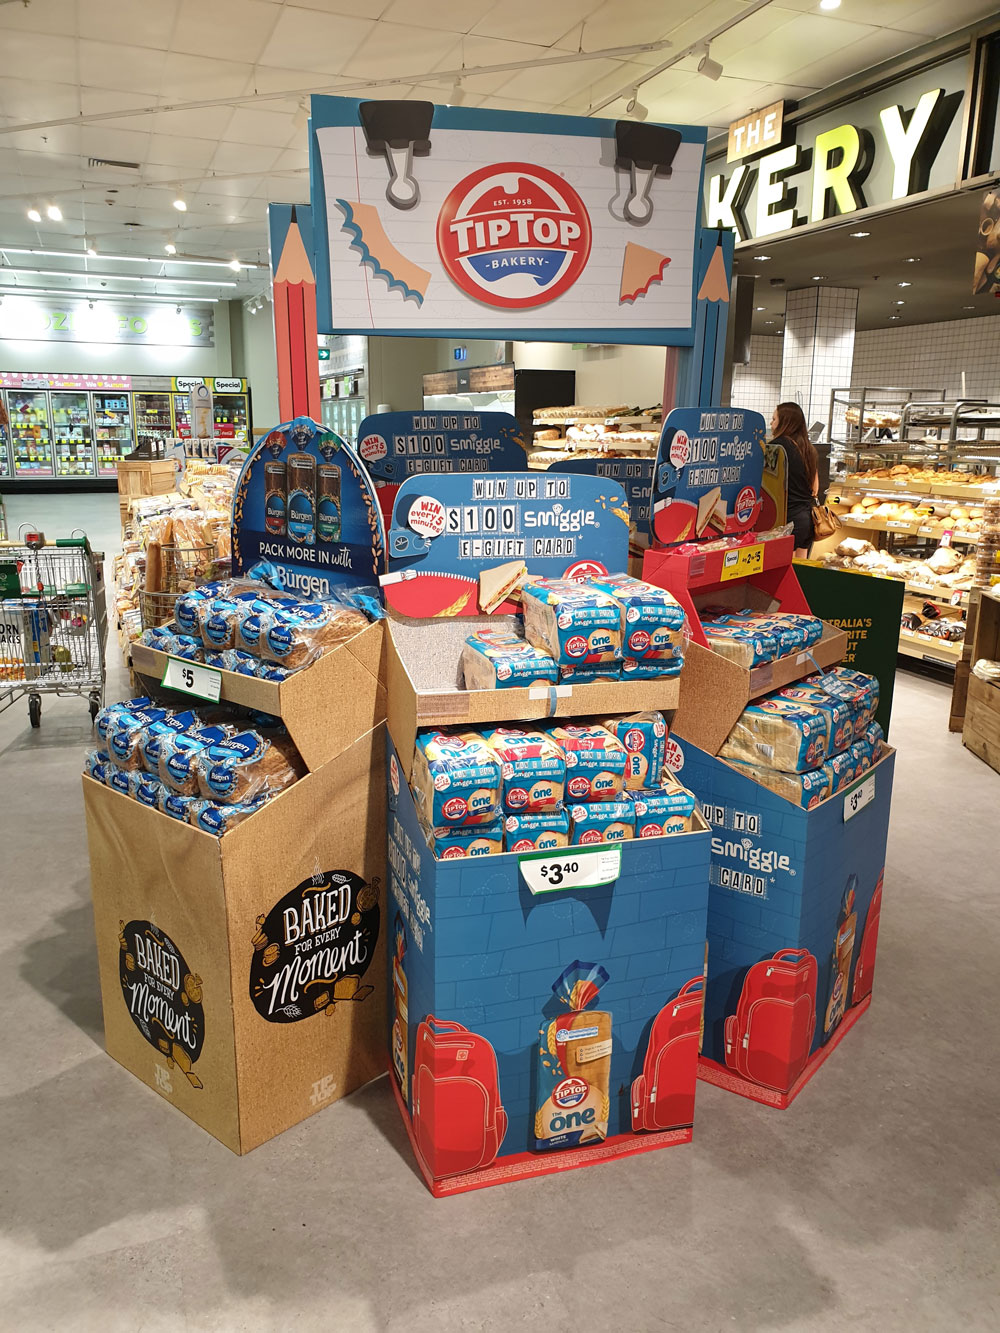 TipTop retail display stands promoting prodct competition in a grocery store